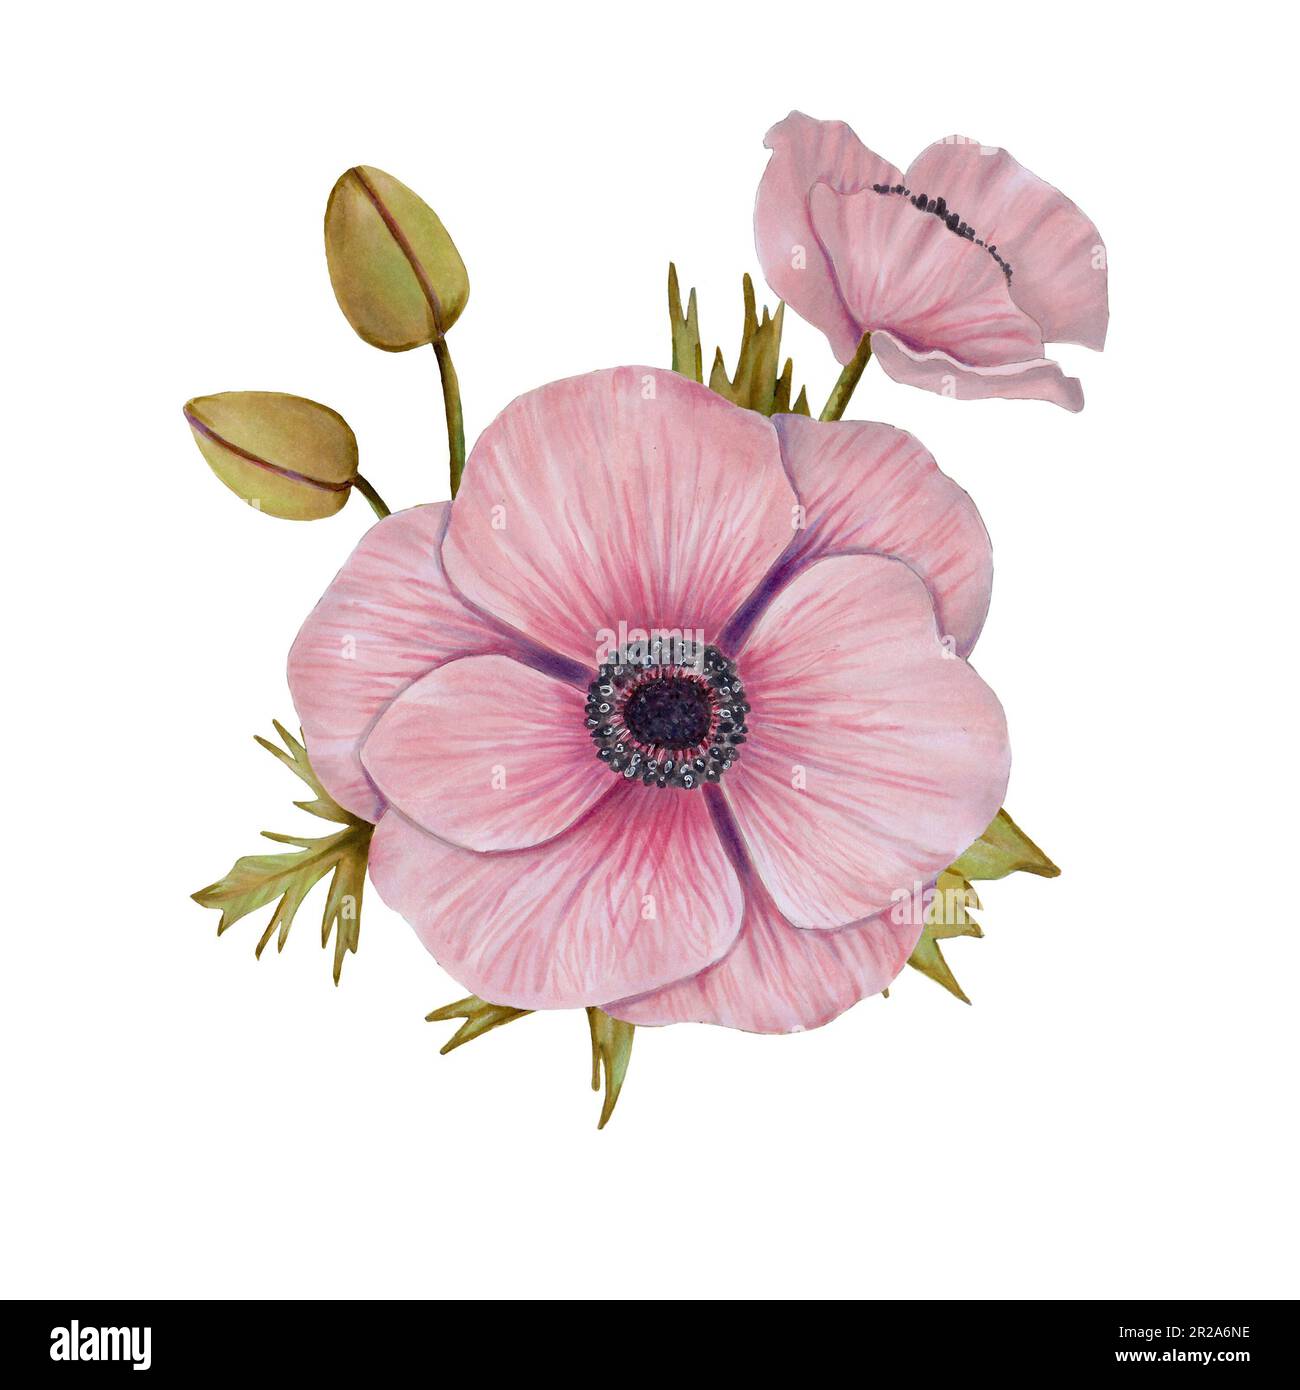 Pink anemone flowers.Anemone leaves.Botanical illustration. Watercolor and marker illustration Isolated. Stock Photo